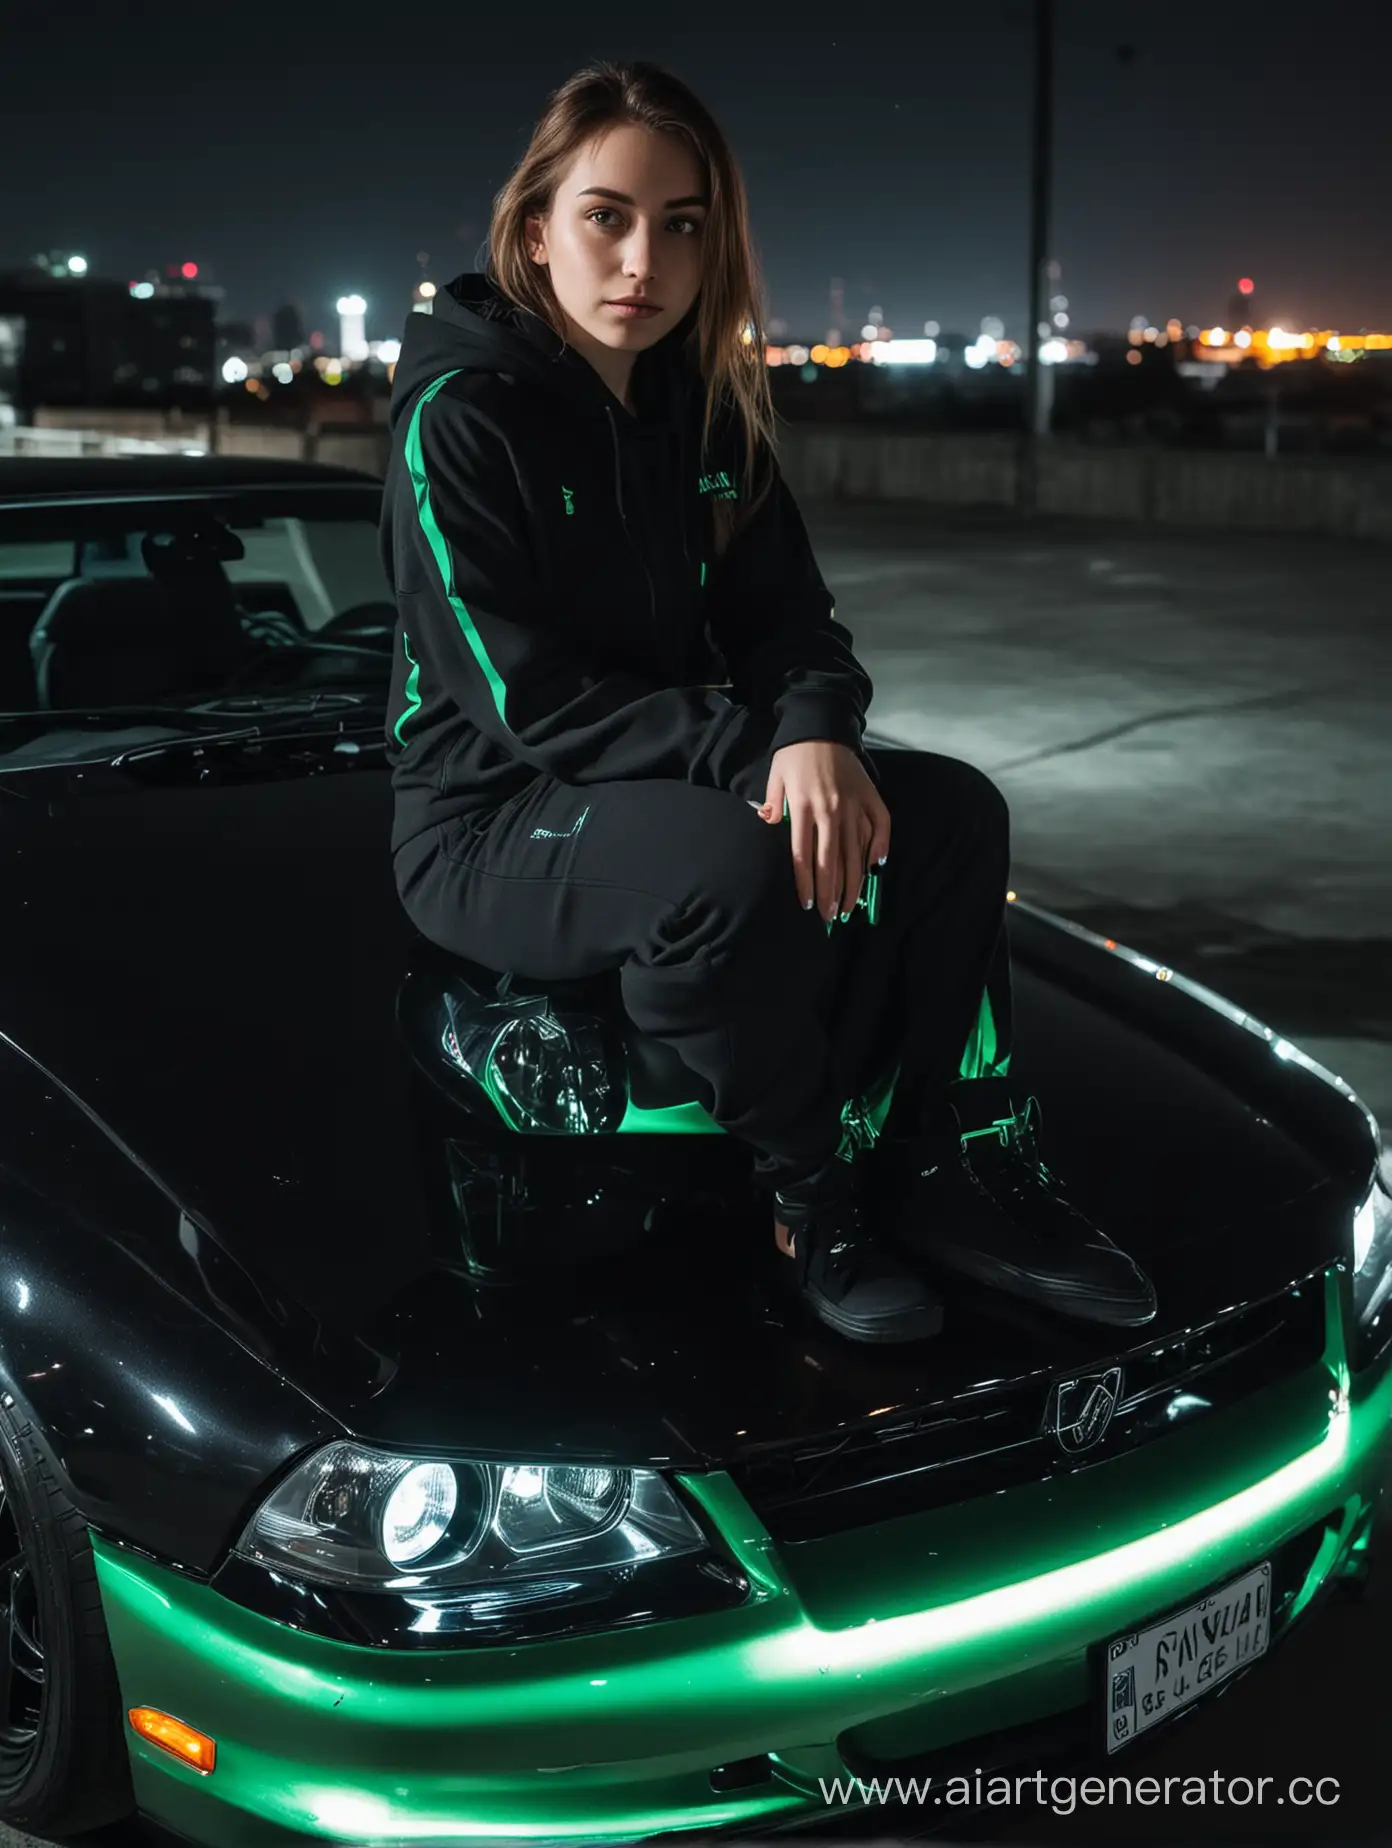 Sporty-Girl-Relaxing-on-Black-Nissan-Skyline-with-Green-Underglow